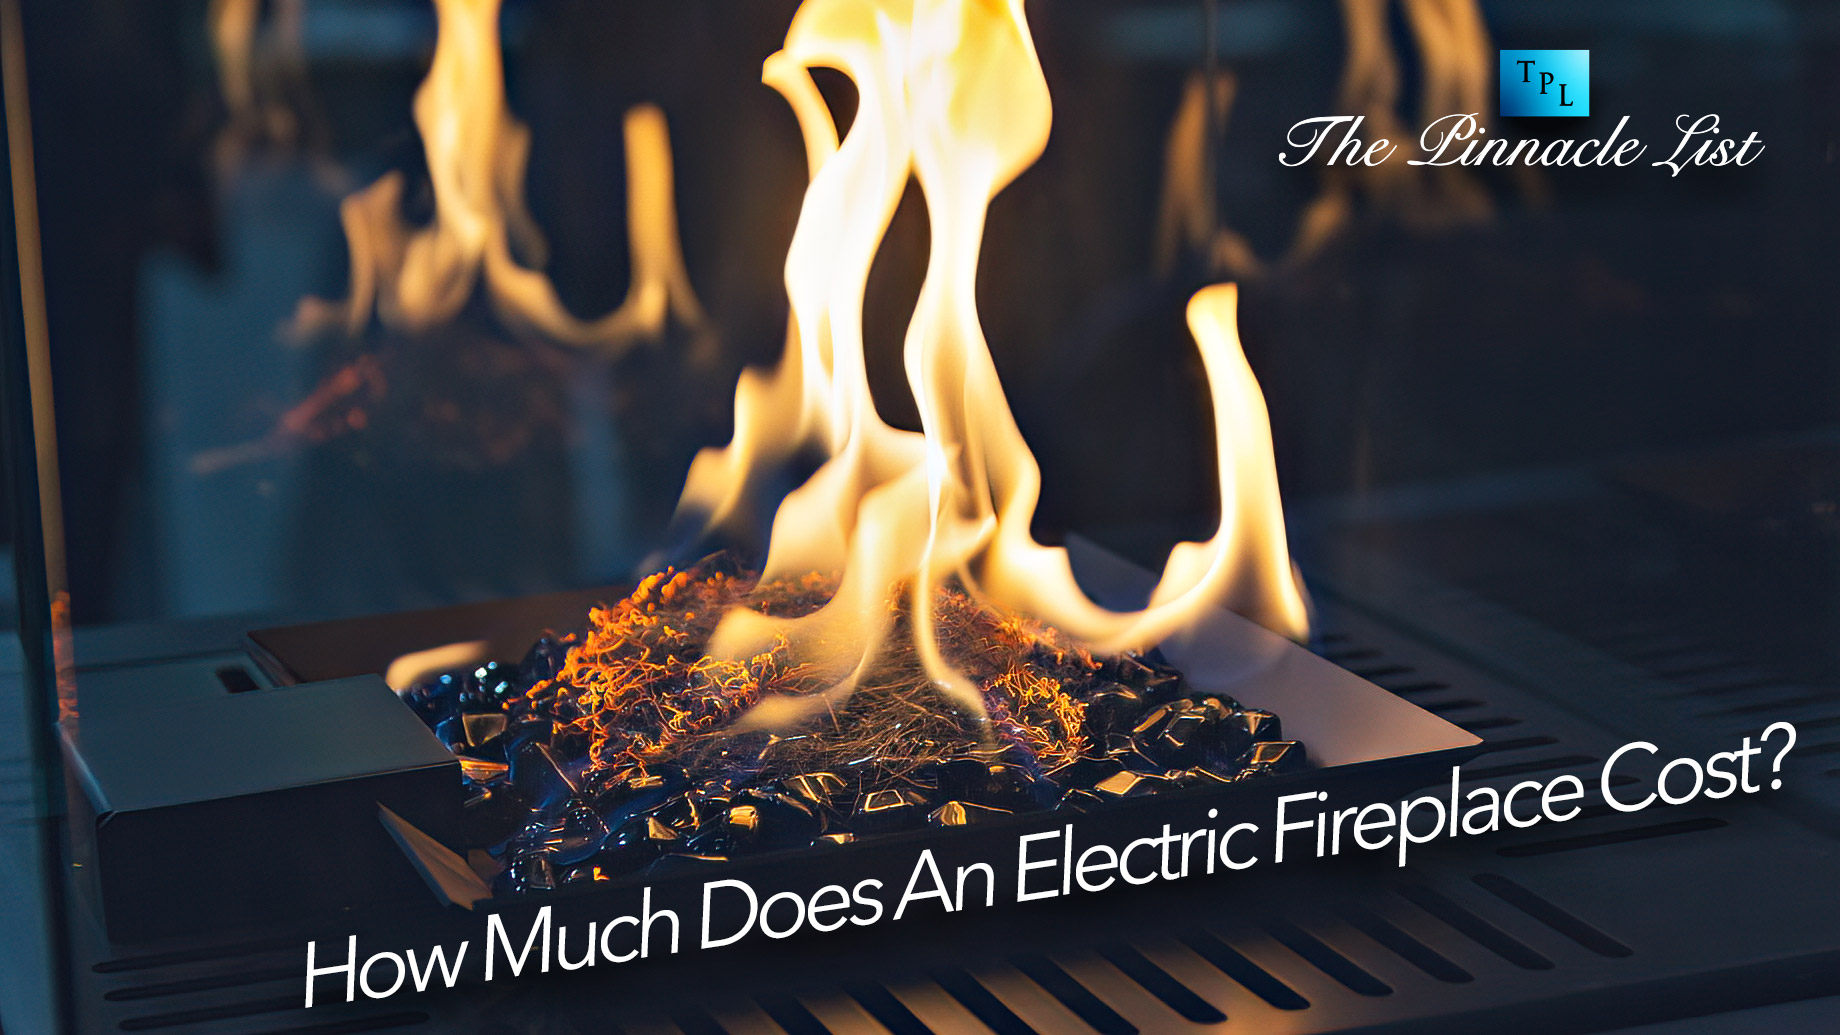 How Much Does An Electric Fireplace Cost?